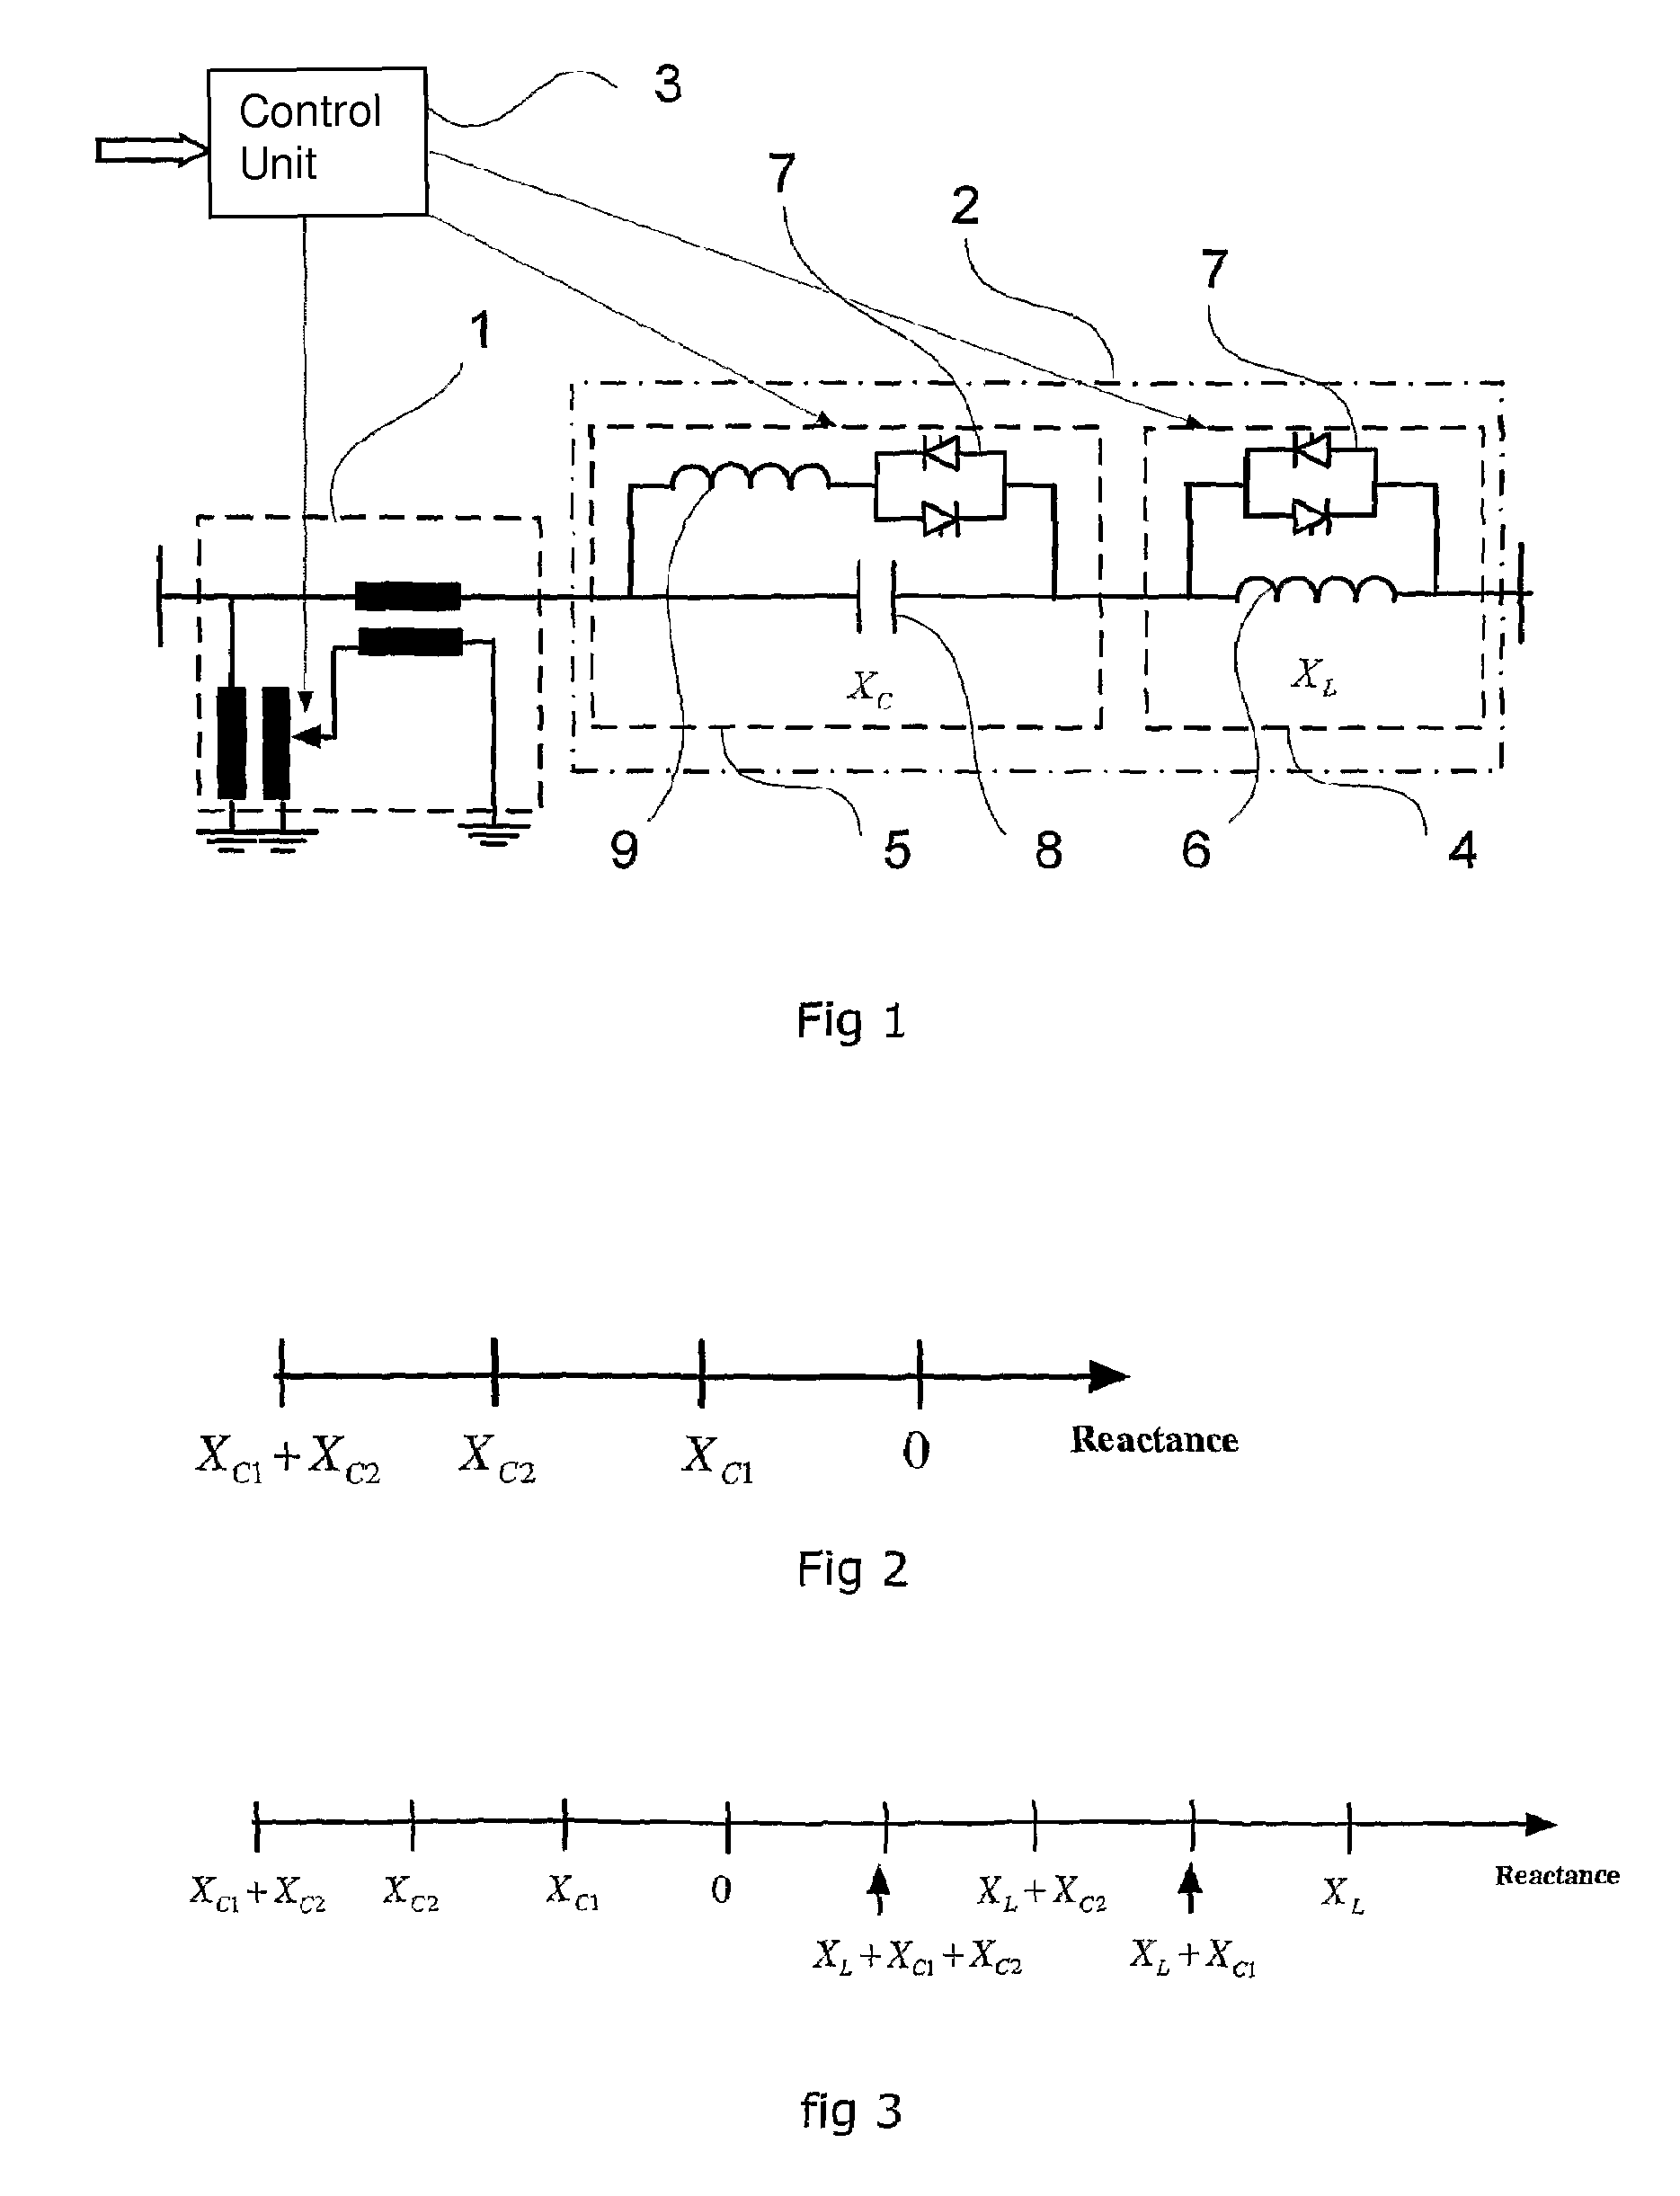 Apparatus and method for improved power flow control in a high voltage network